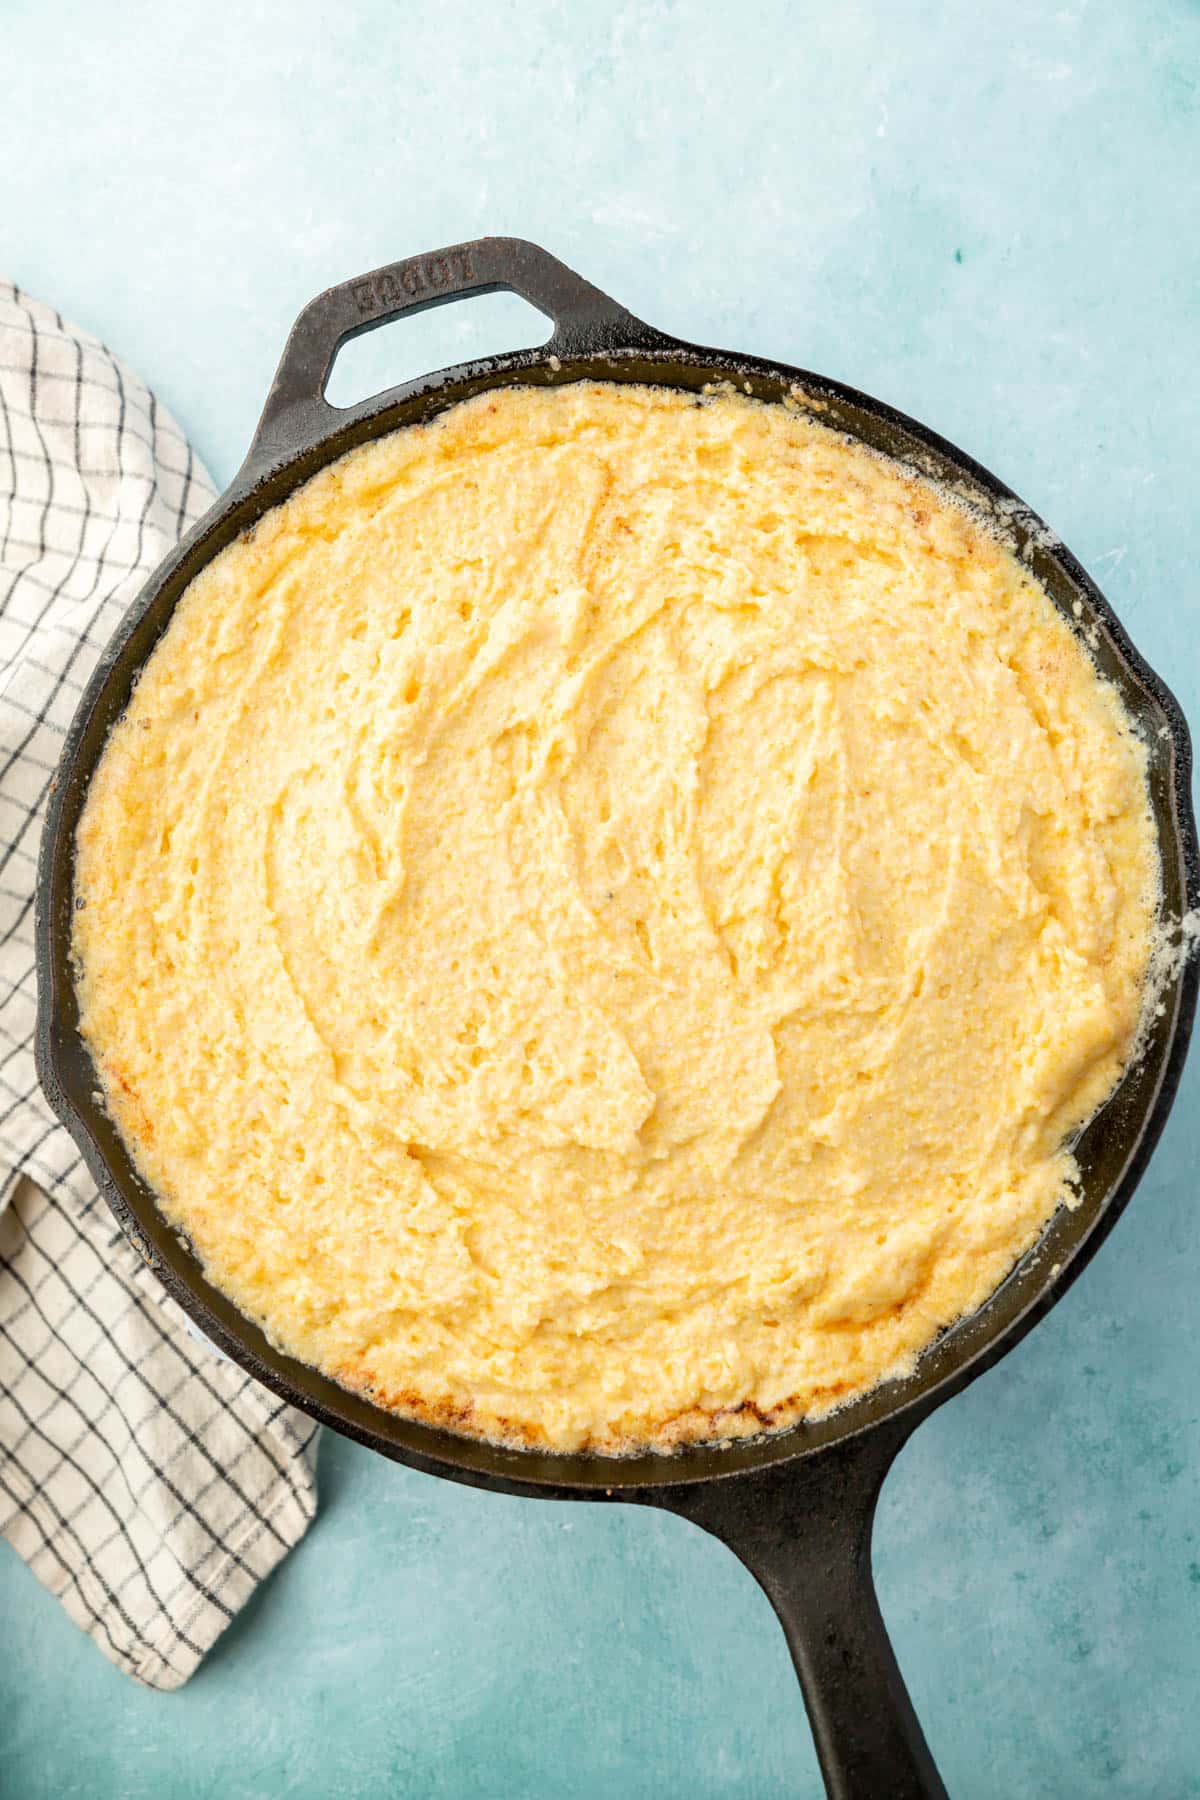 A cast iron skillet filled with gluten-free cornbread batter before baking.